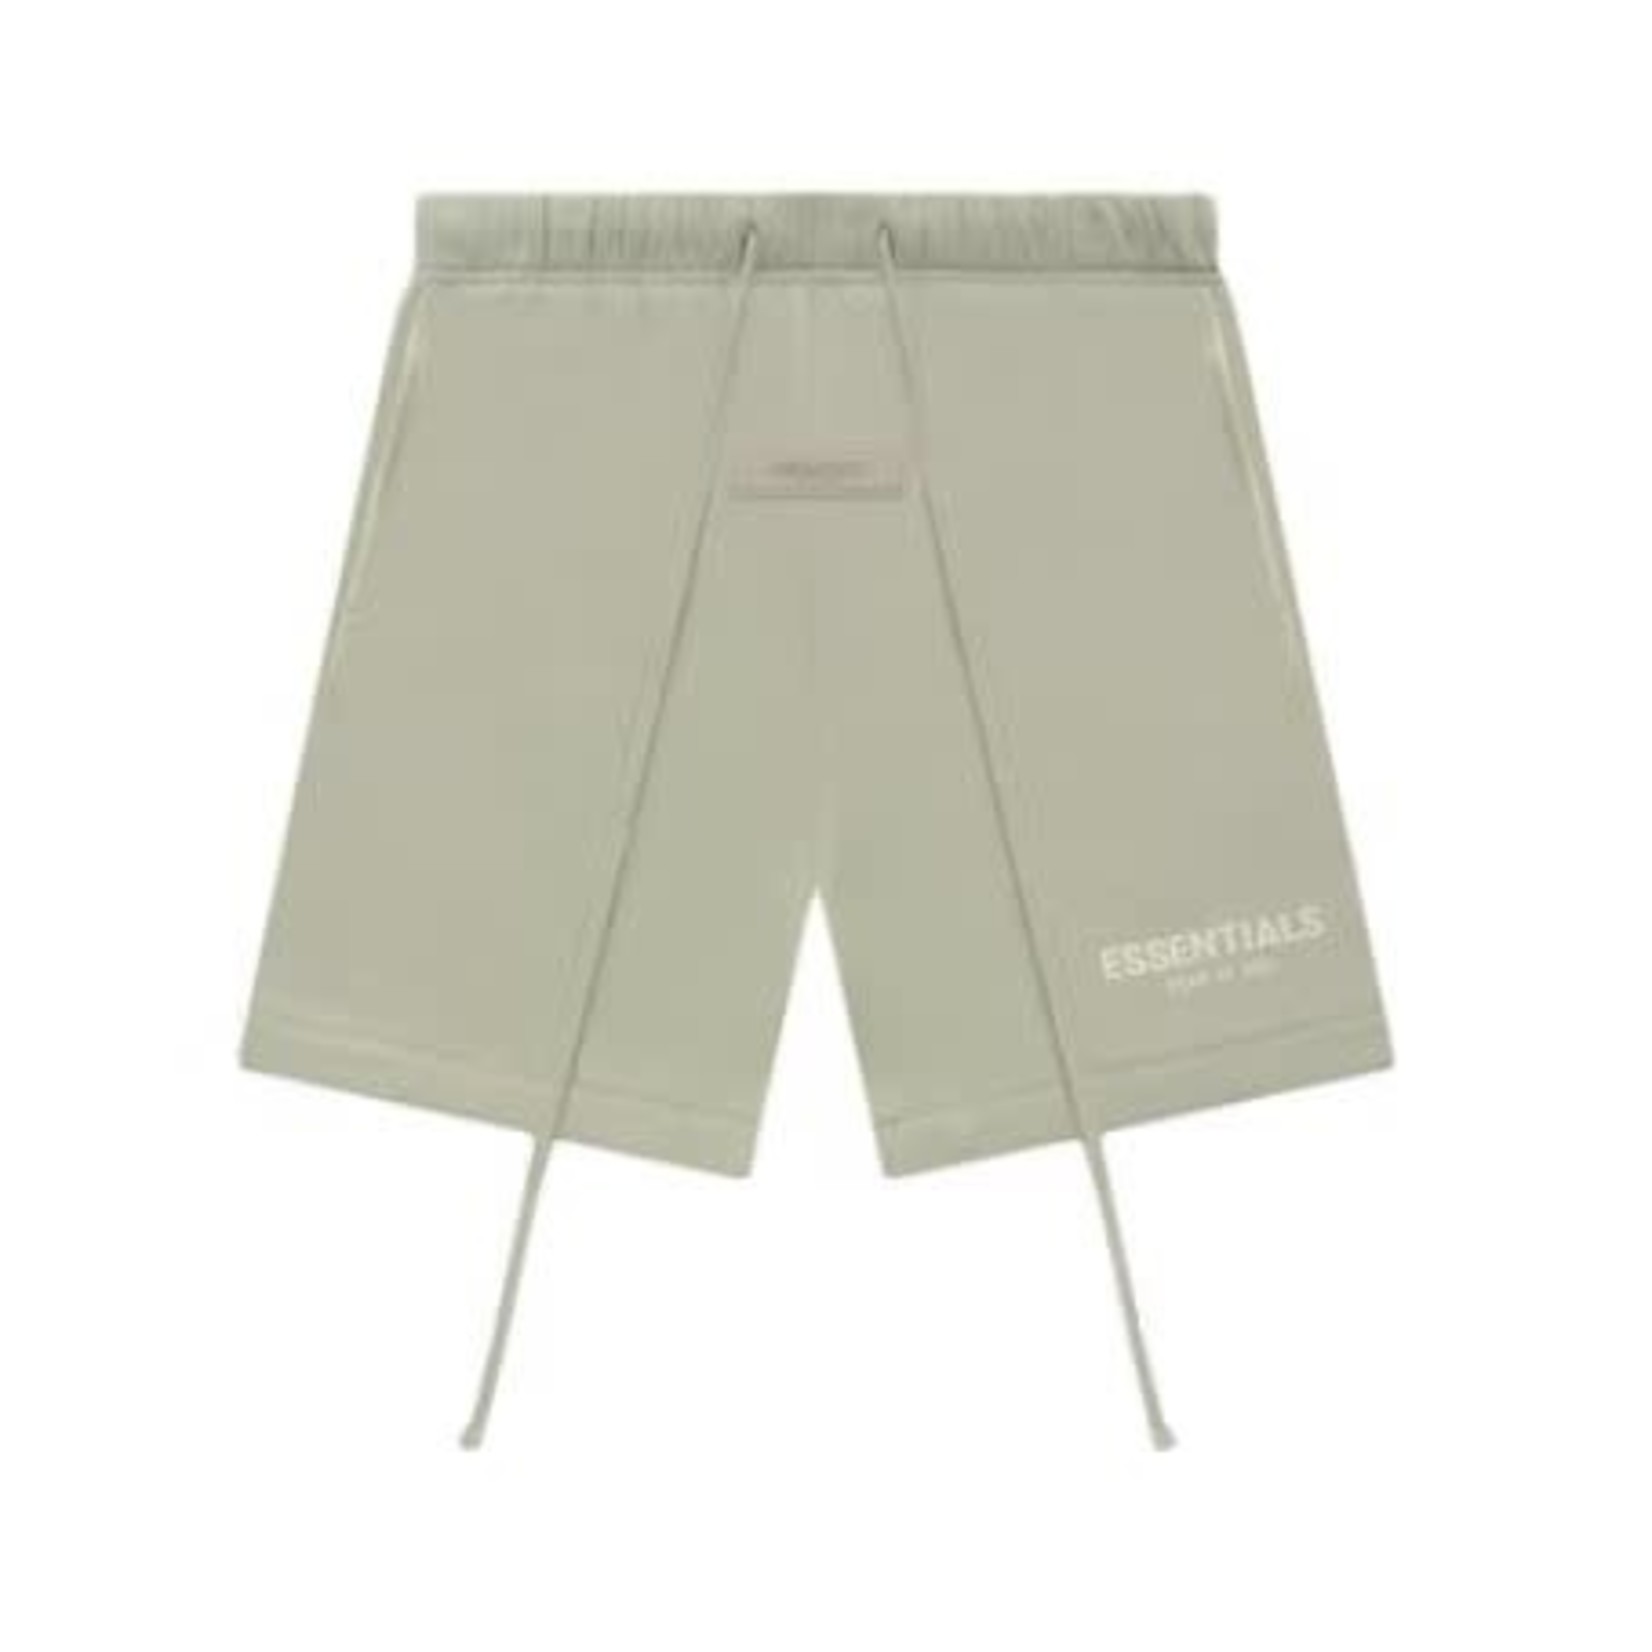 Fear of God Fear Of God Essentials Shorts Seafoam Size Large, DS BRAND NEW